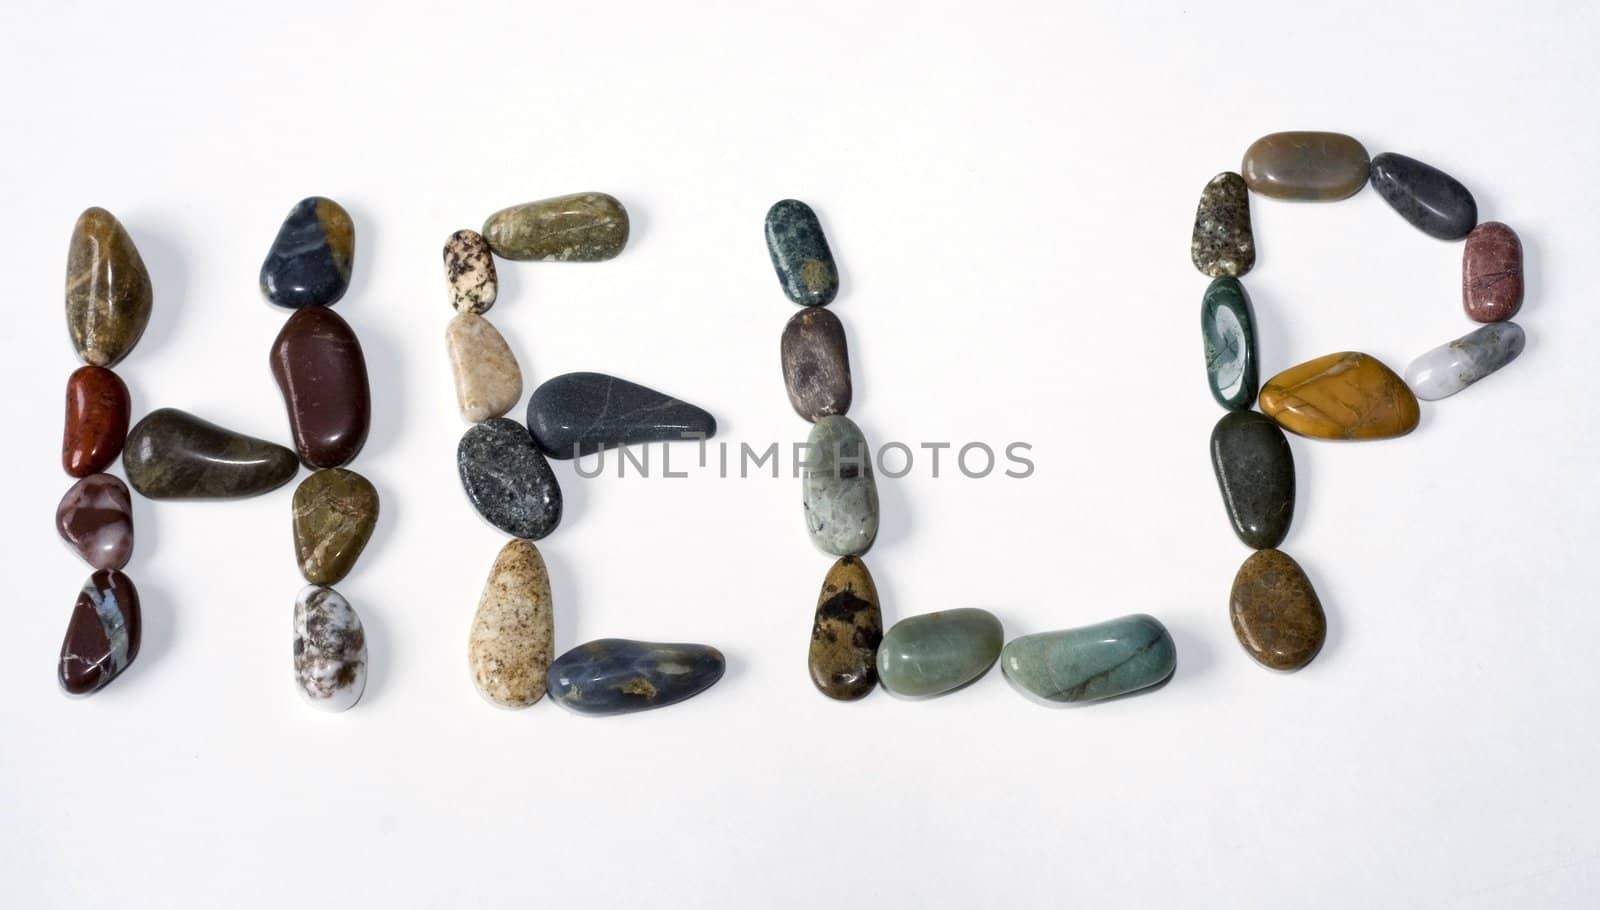 The word help spelled out in colorful polished gems and stones on a white background